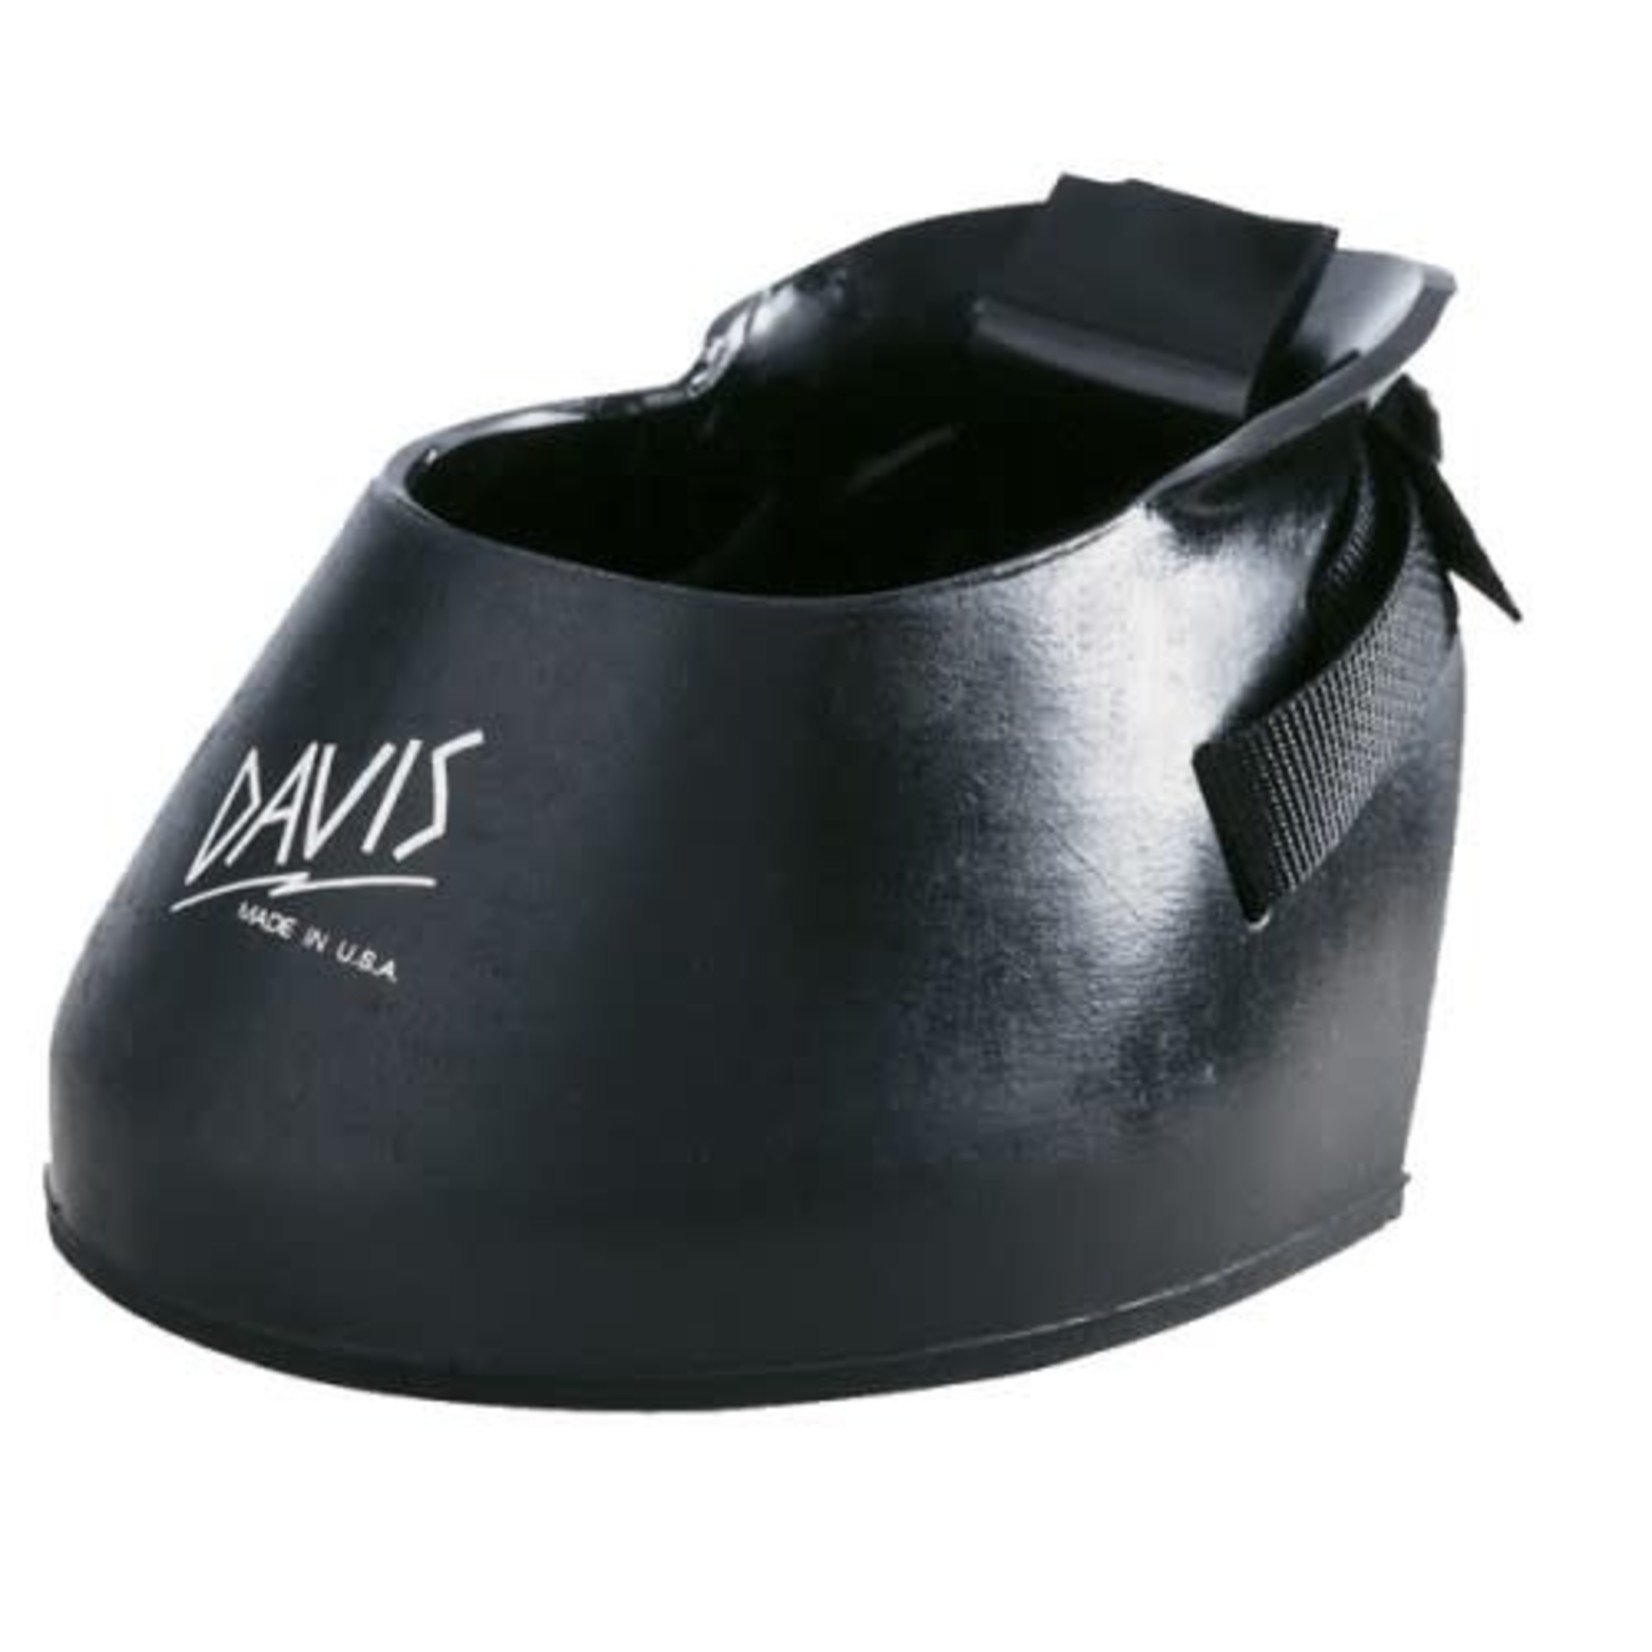 Davis Equine Products Barrier Boot